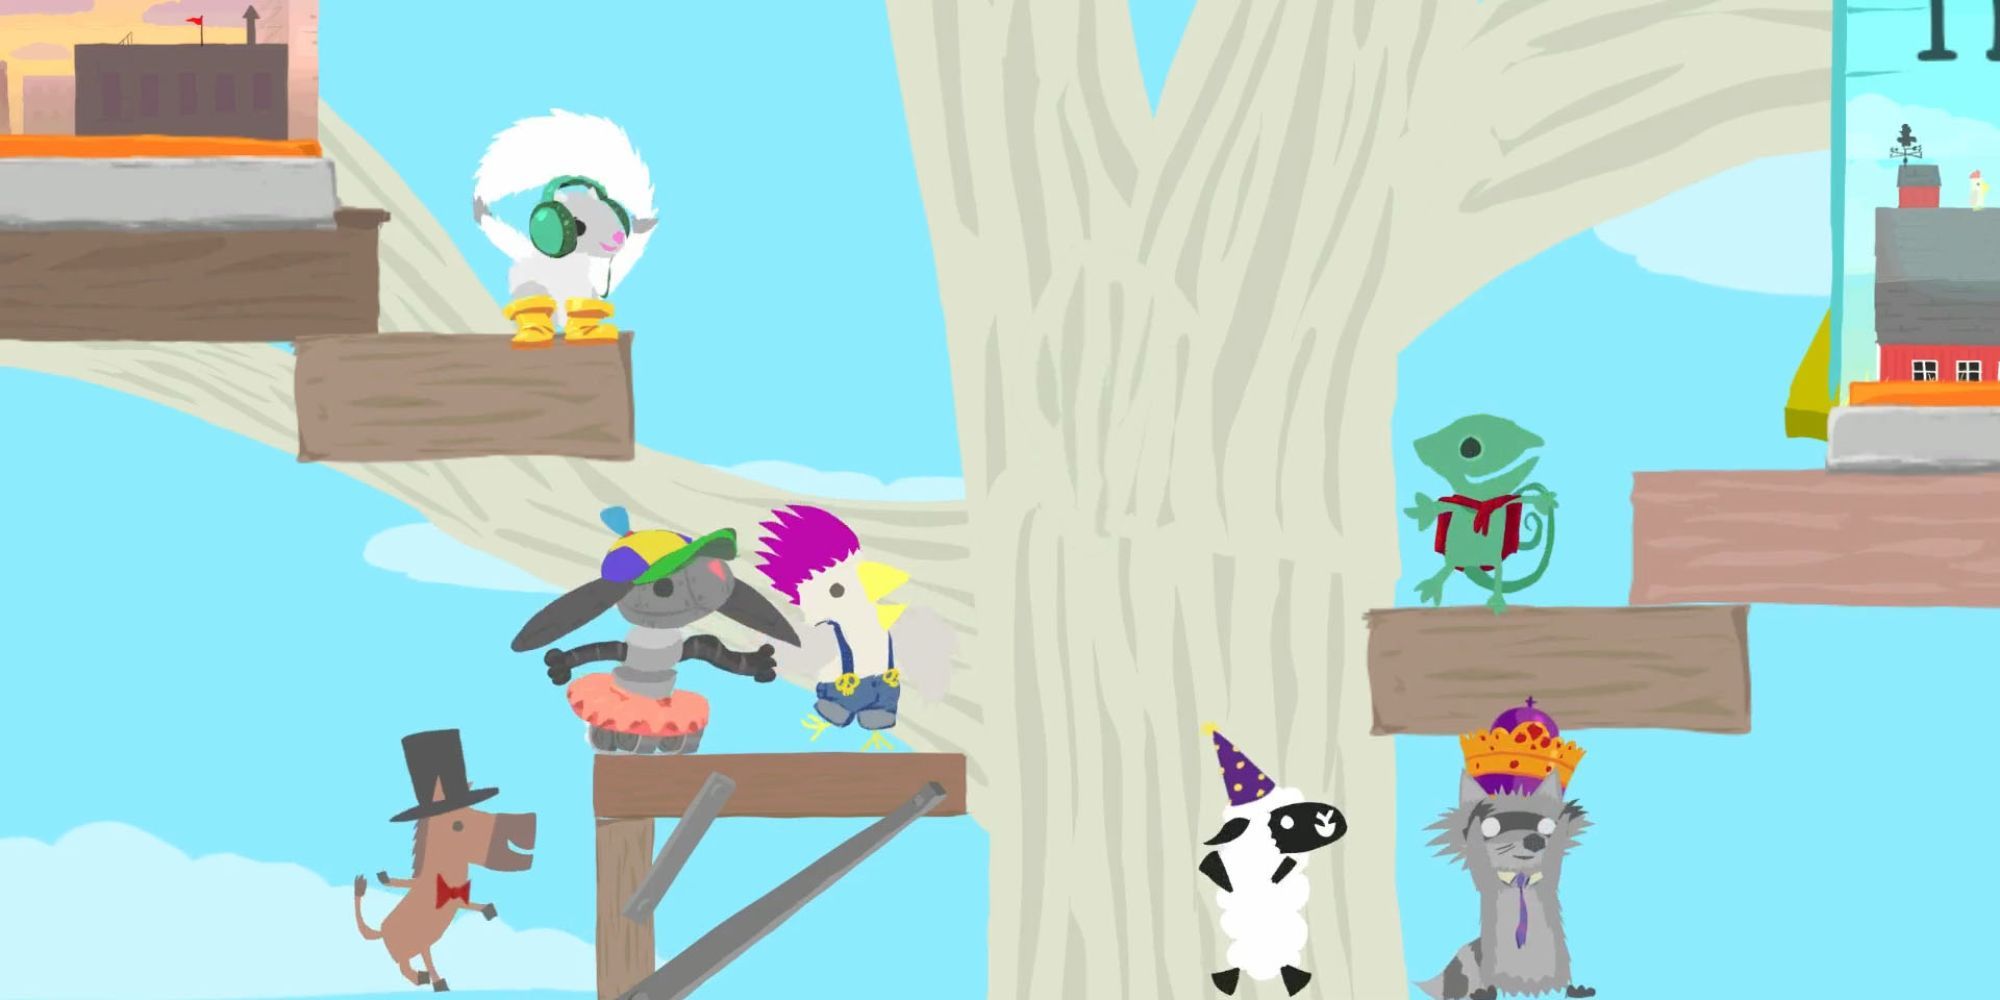 The level select screen in Ultimate Chicken Horse.